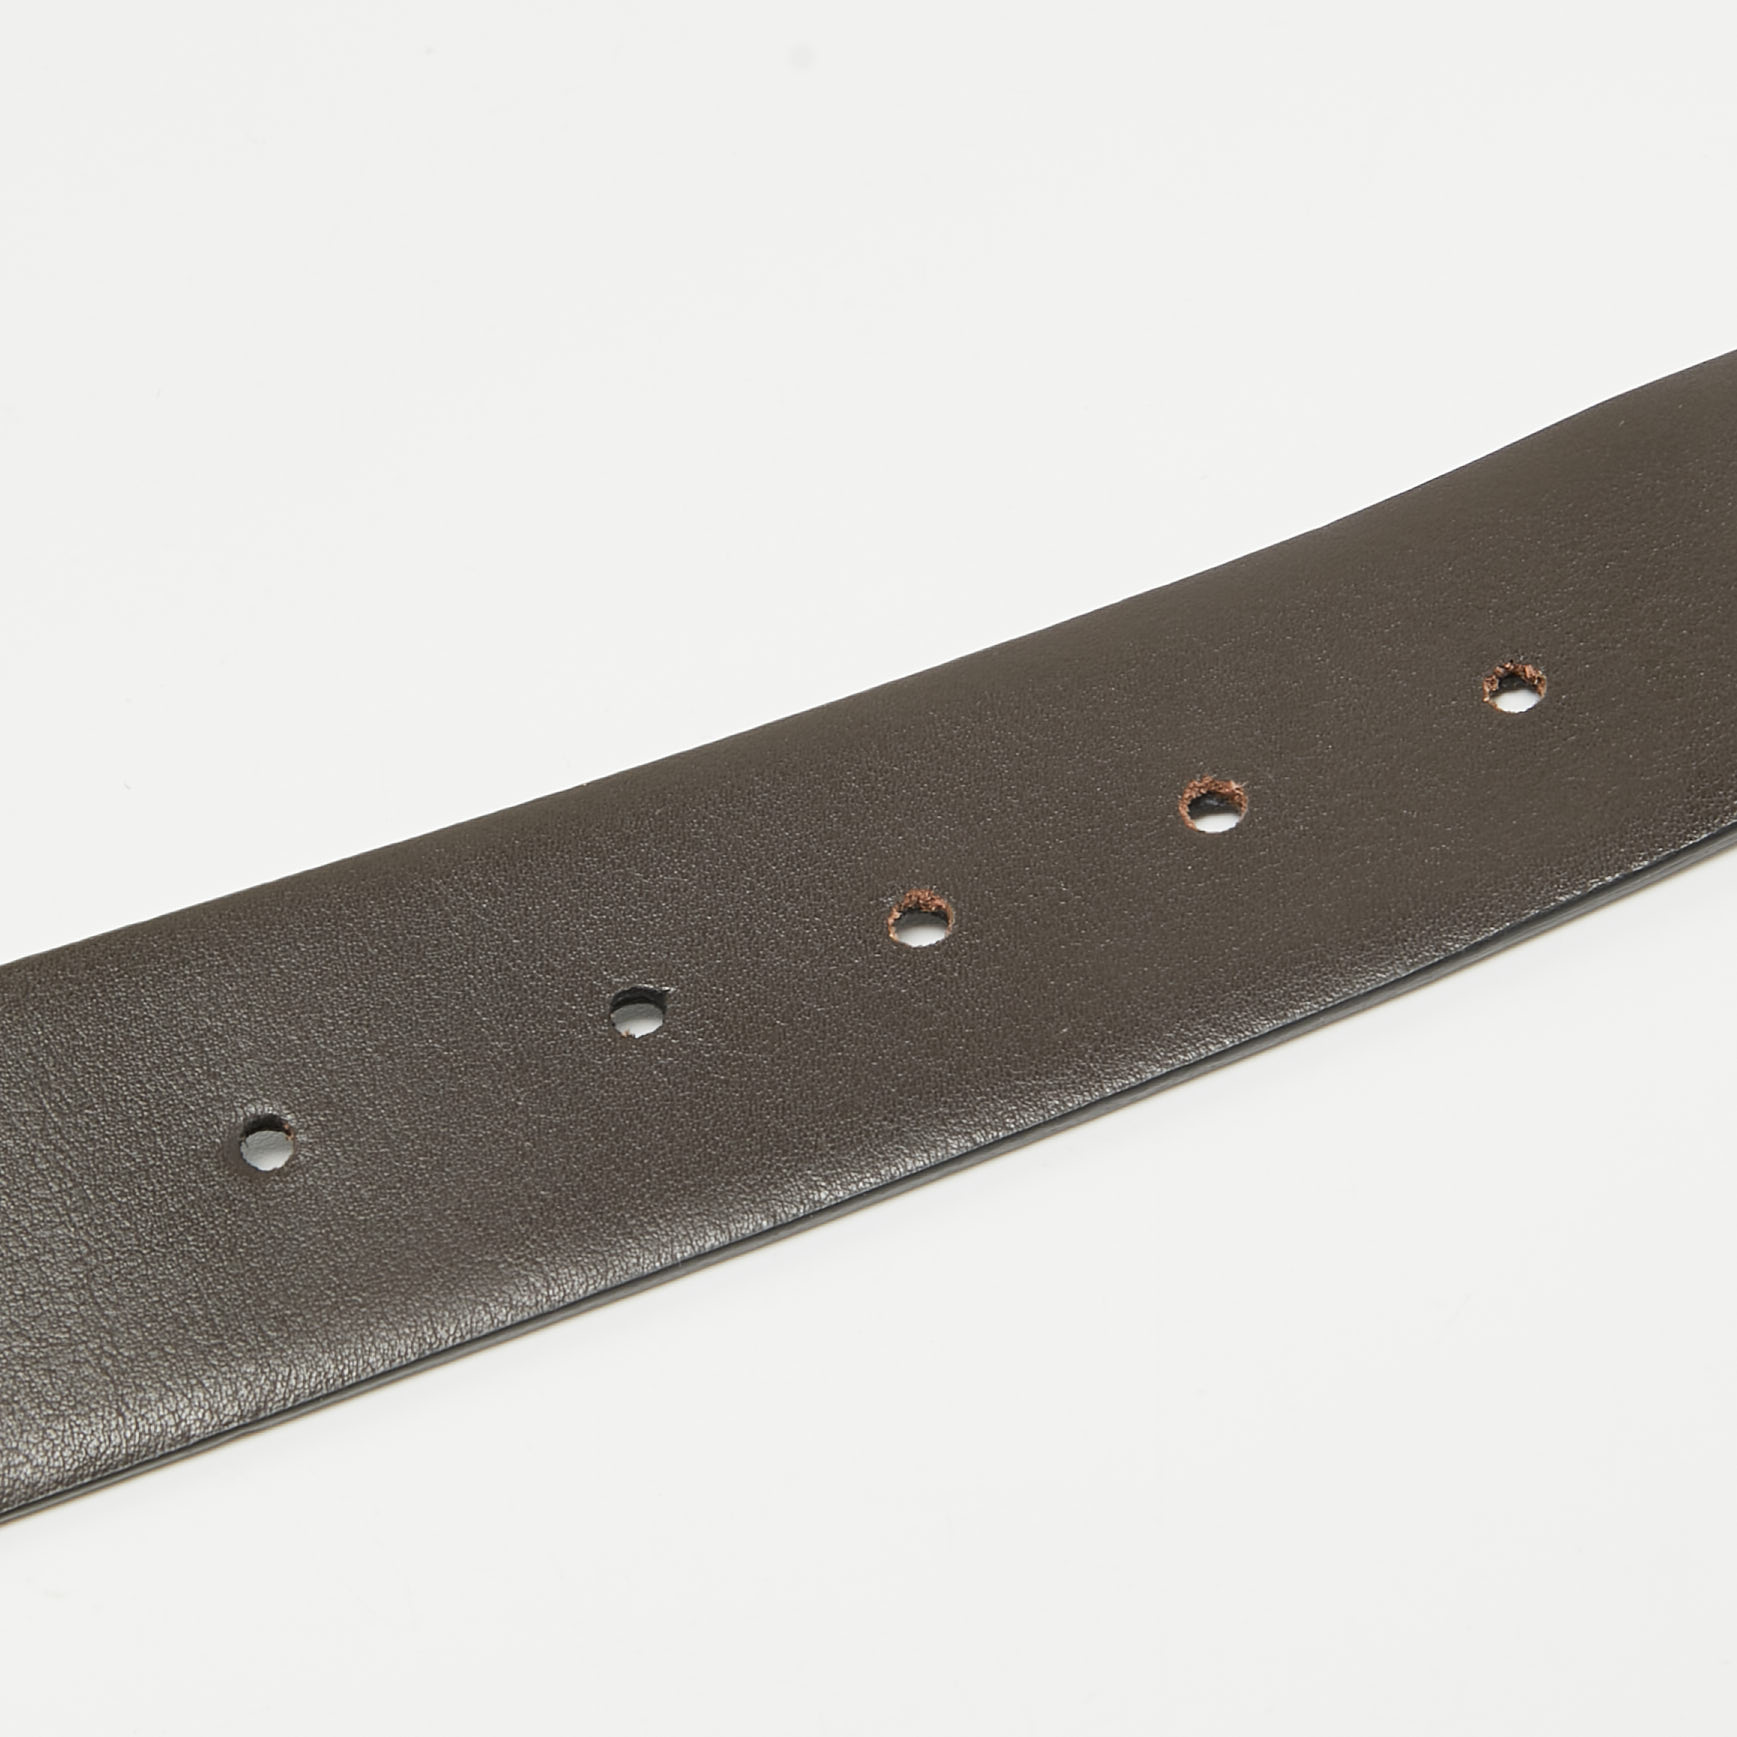 Emporio Armani Black/Choco Brown Leather Reversible Cut To Size Buckle Belt